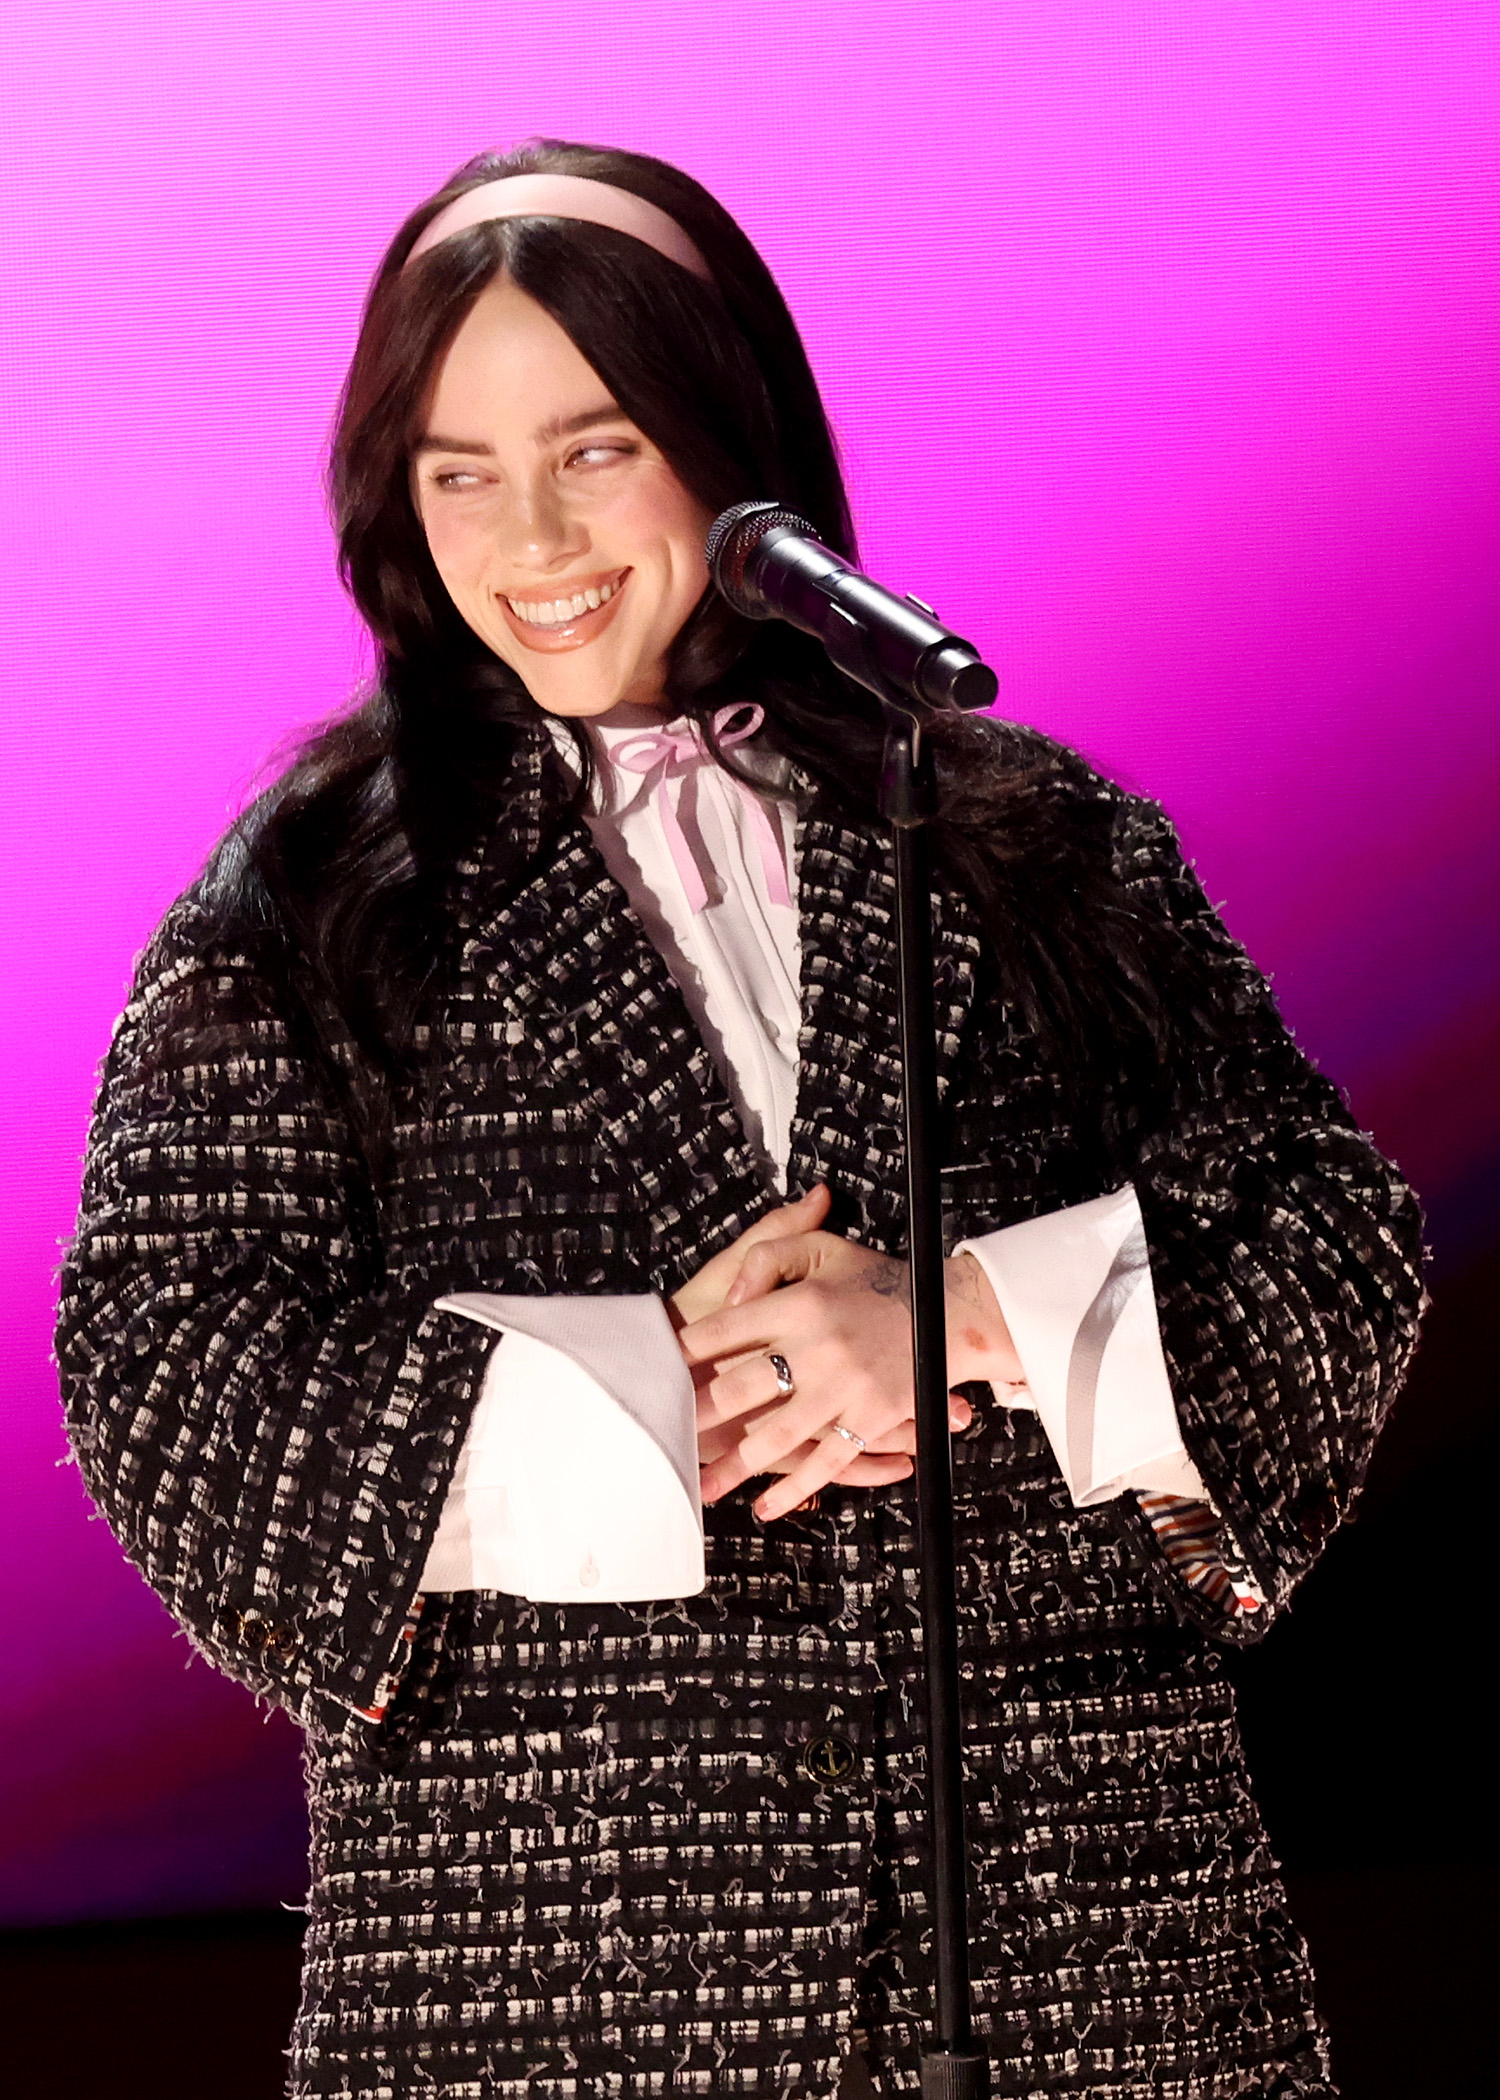 Billie Eilish stands at a microphone in a textured coat and ribbon-tied blouse, smiling